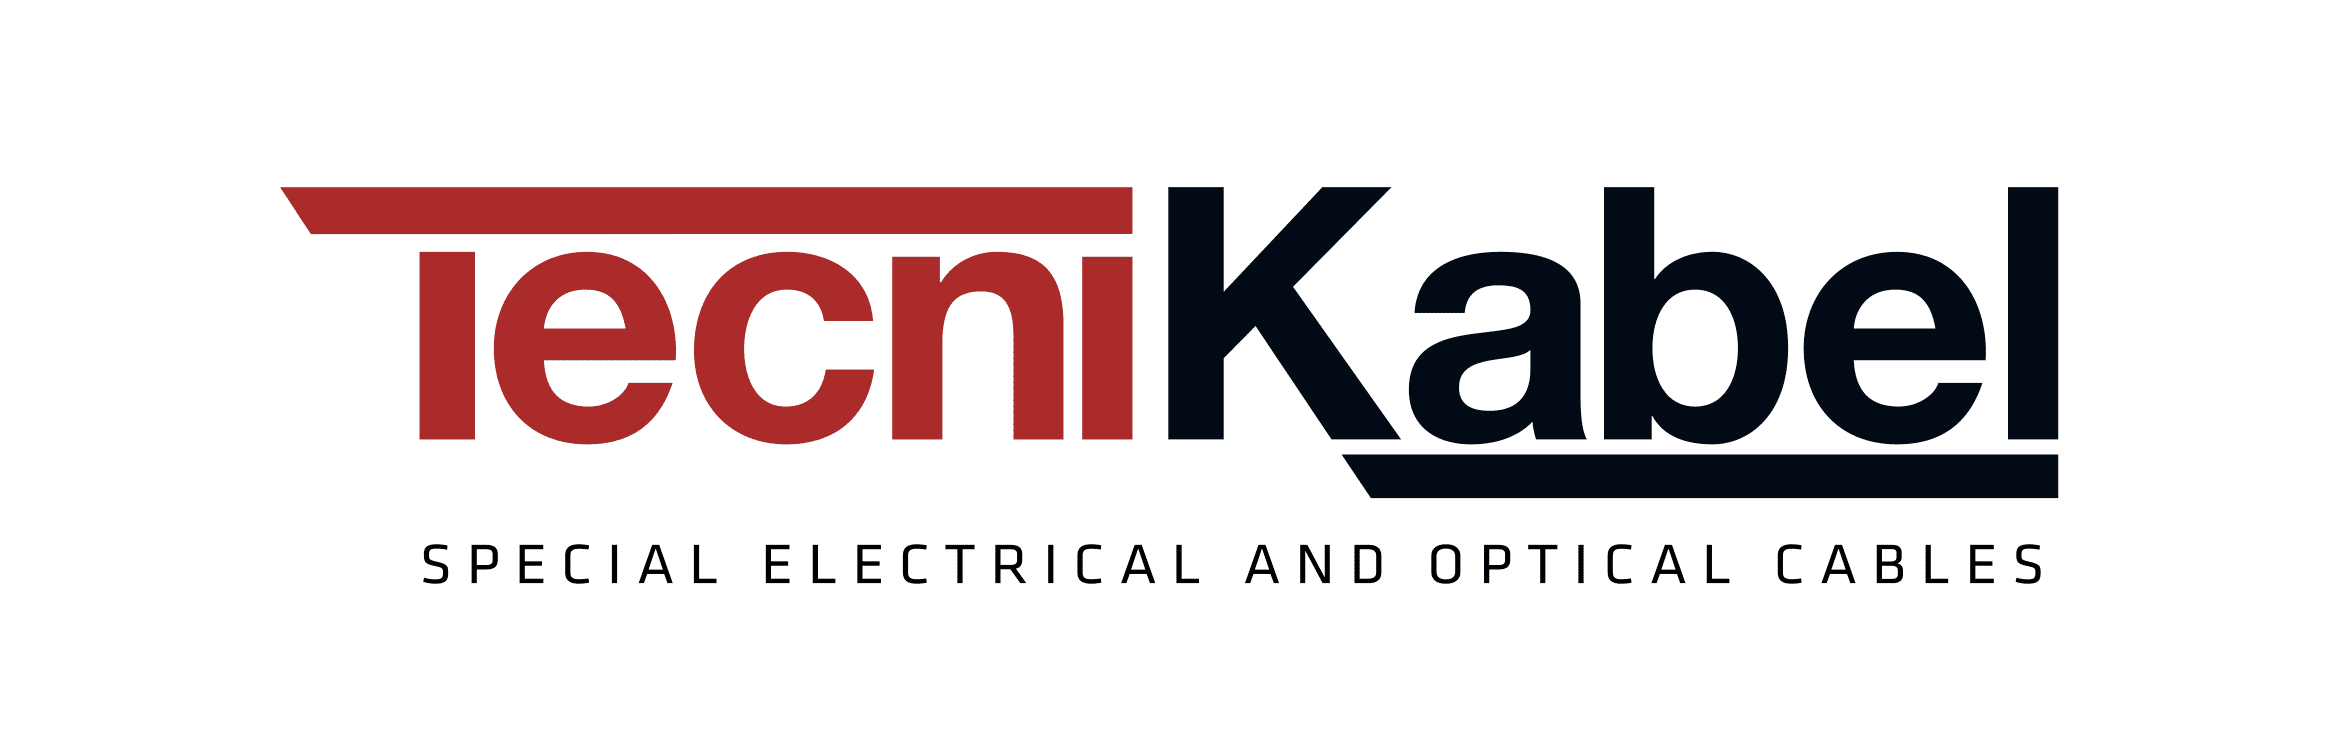 Special Electrical and Optical Cables